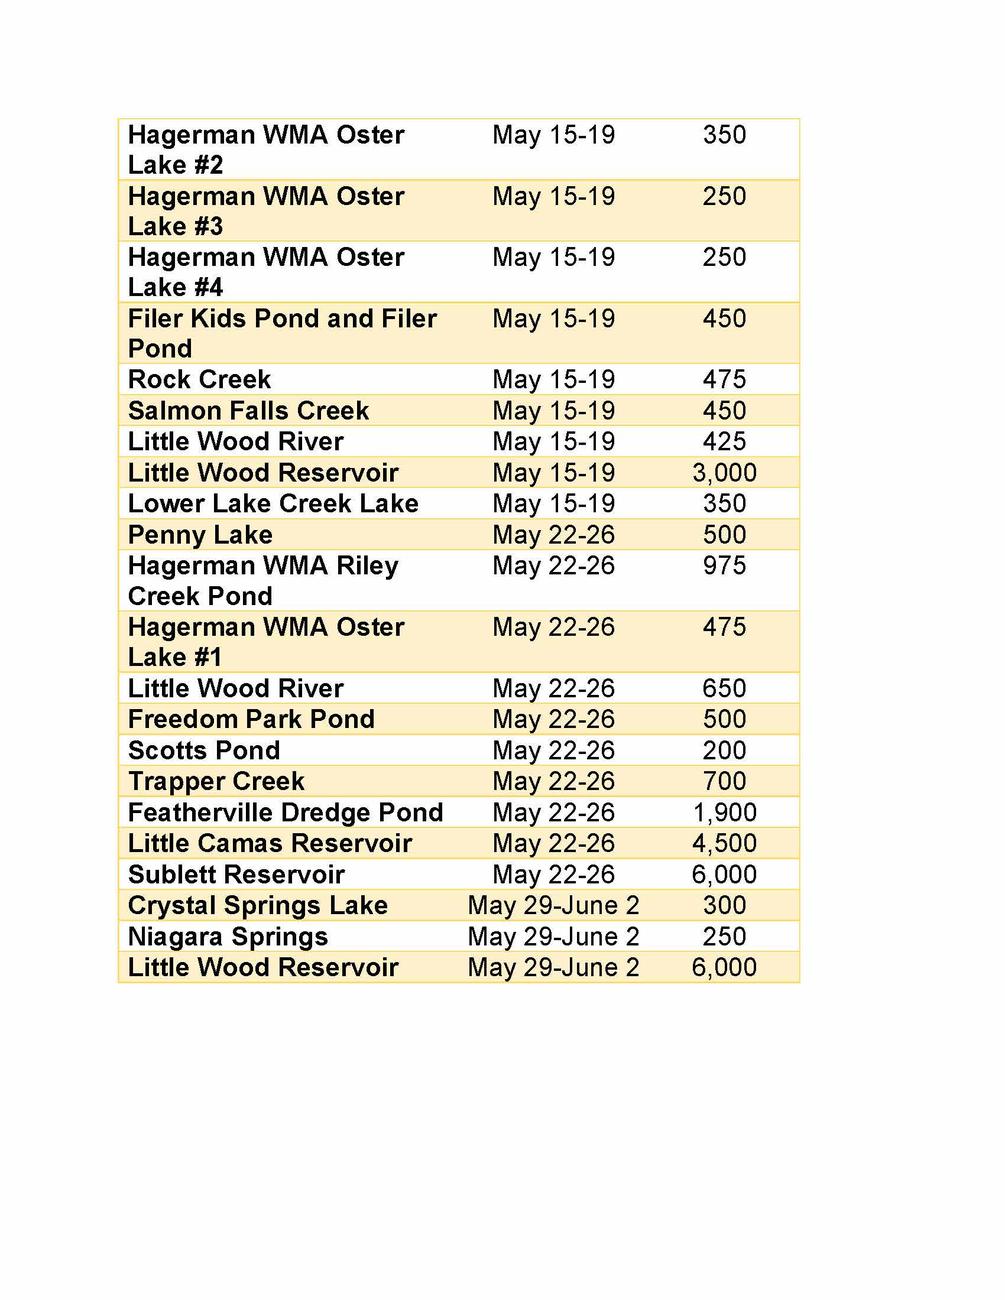 Rainbow trout stocking schedule for May 2023 in the Magic Valley Region